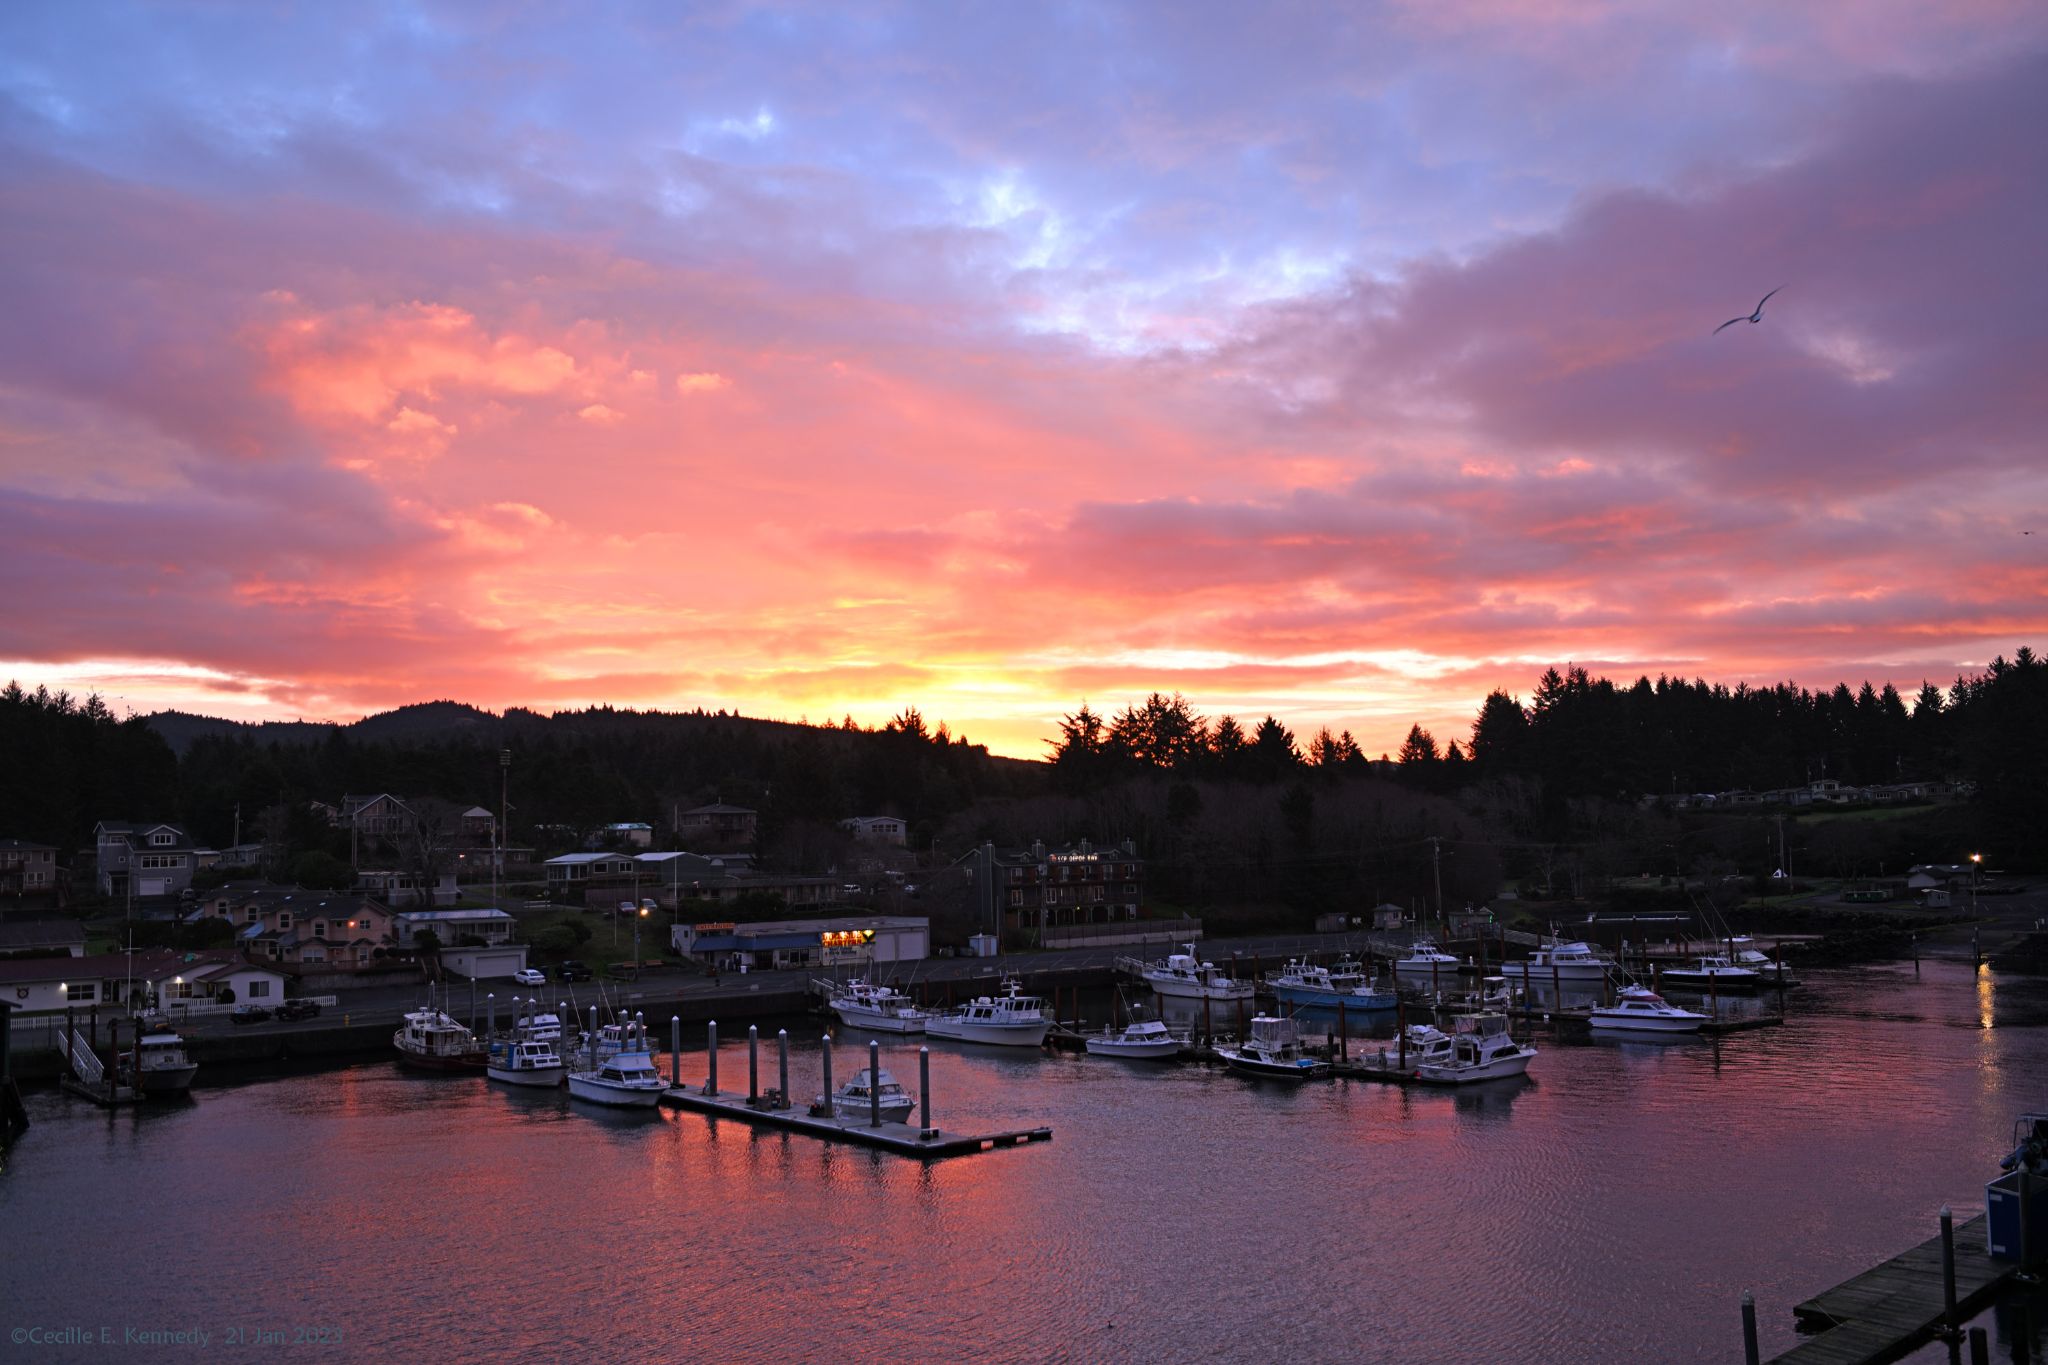 Community photo by Cecille Kennedy | Depoe Bay Harbor, Oregon